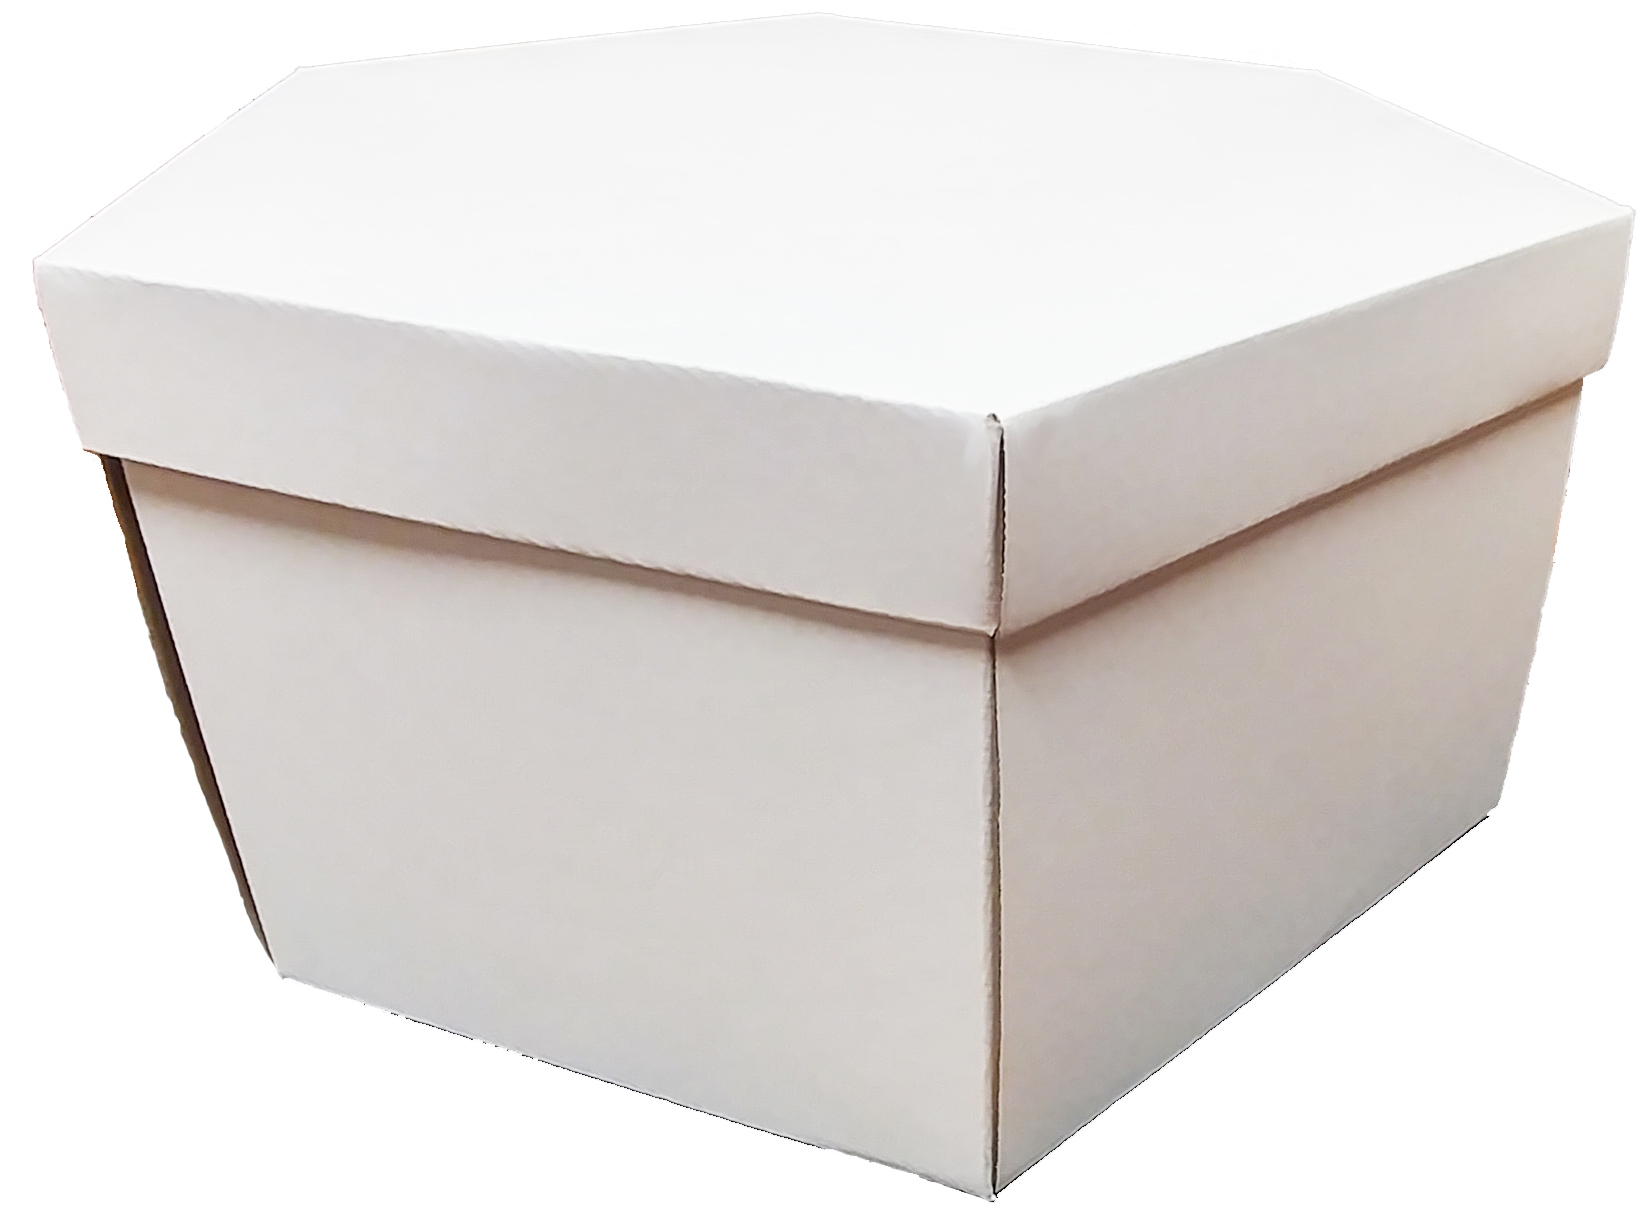 White 2 Piece Hat Box 14 inch x 14 inch x 7 inch | Quantity: 25 by Paper Mart